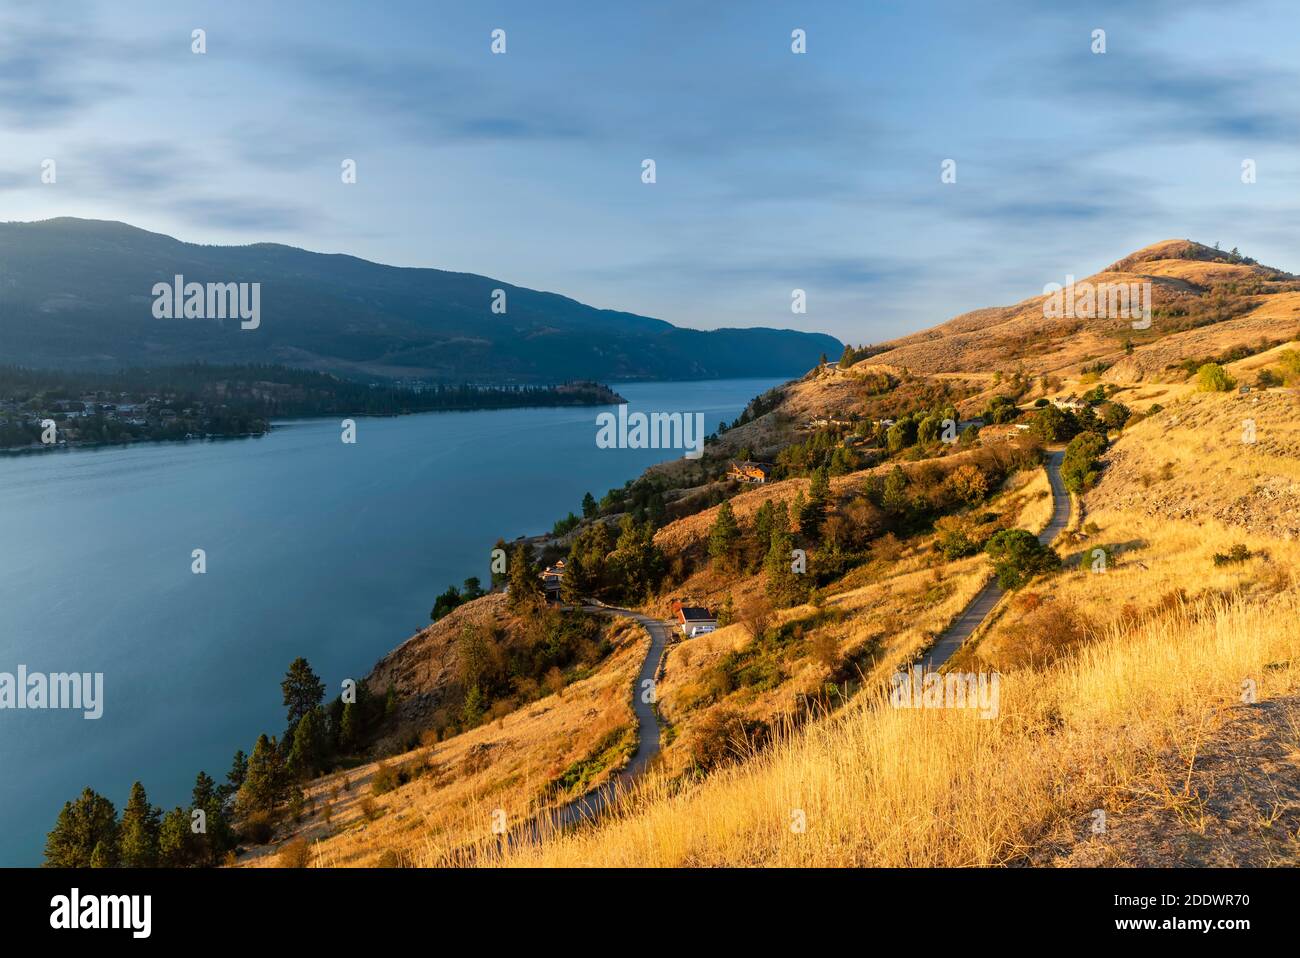 A hillside with yellow grass, paths, and private houses lit by the matins sun, the blue smooth surface of the river, silhouettes of mountains, and a b Stock Photo